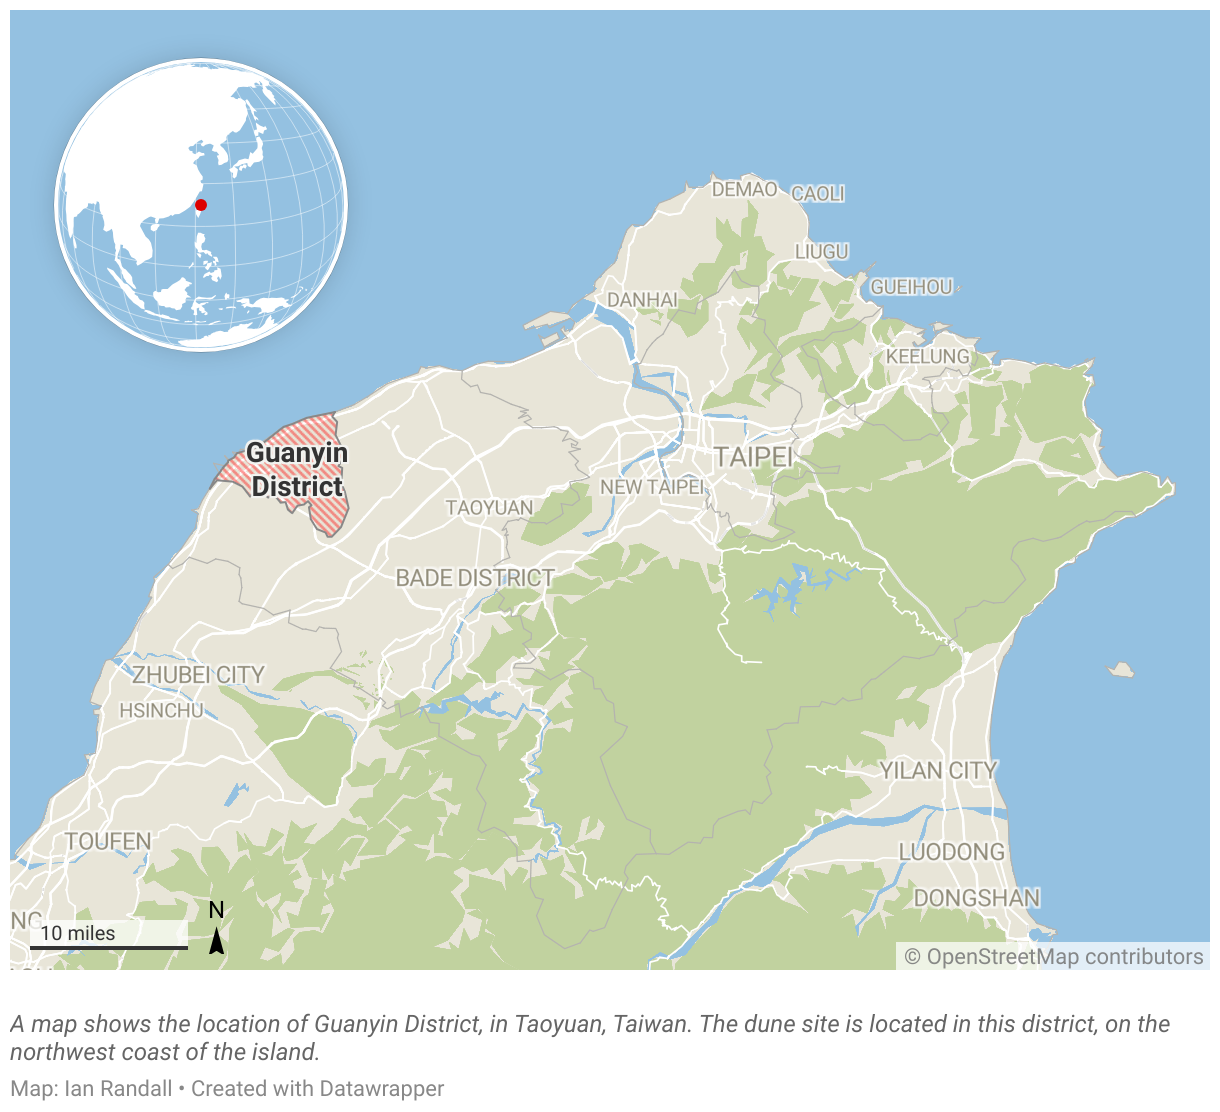 A map shows the location of Guanyin District, in western Taoyuan, Taiwan.